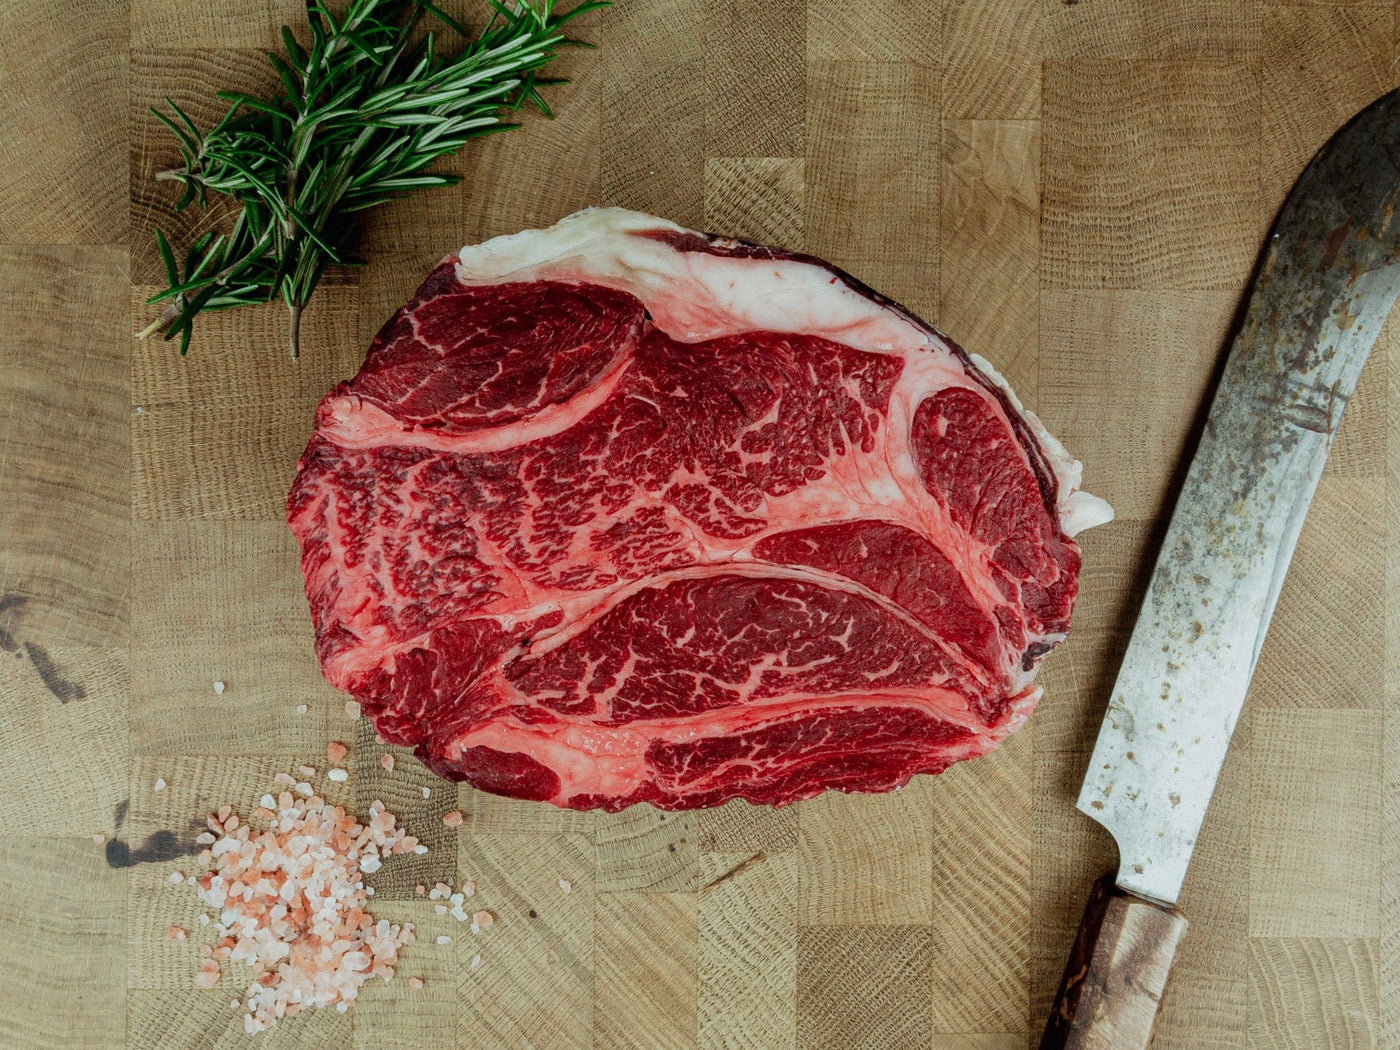 Grass Fed, Dry-Aged Chuck Steak - Beef - Thomas Joseph Butchery - Ethical Dry-Aged Meat The Best Steak UK Thomas Joseph Butchery